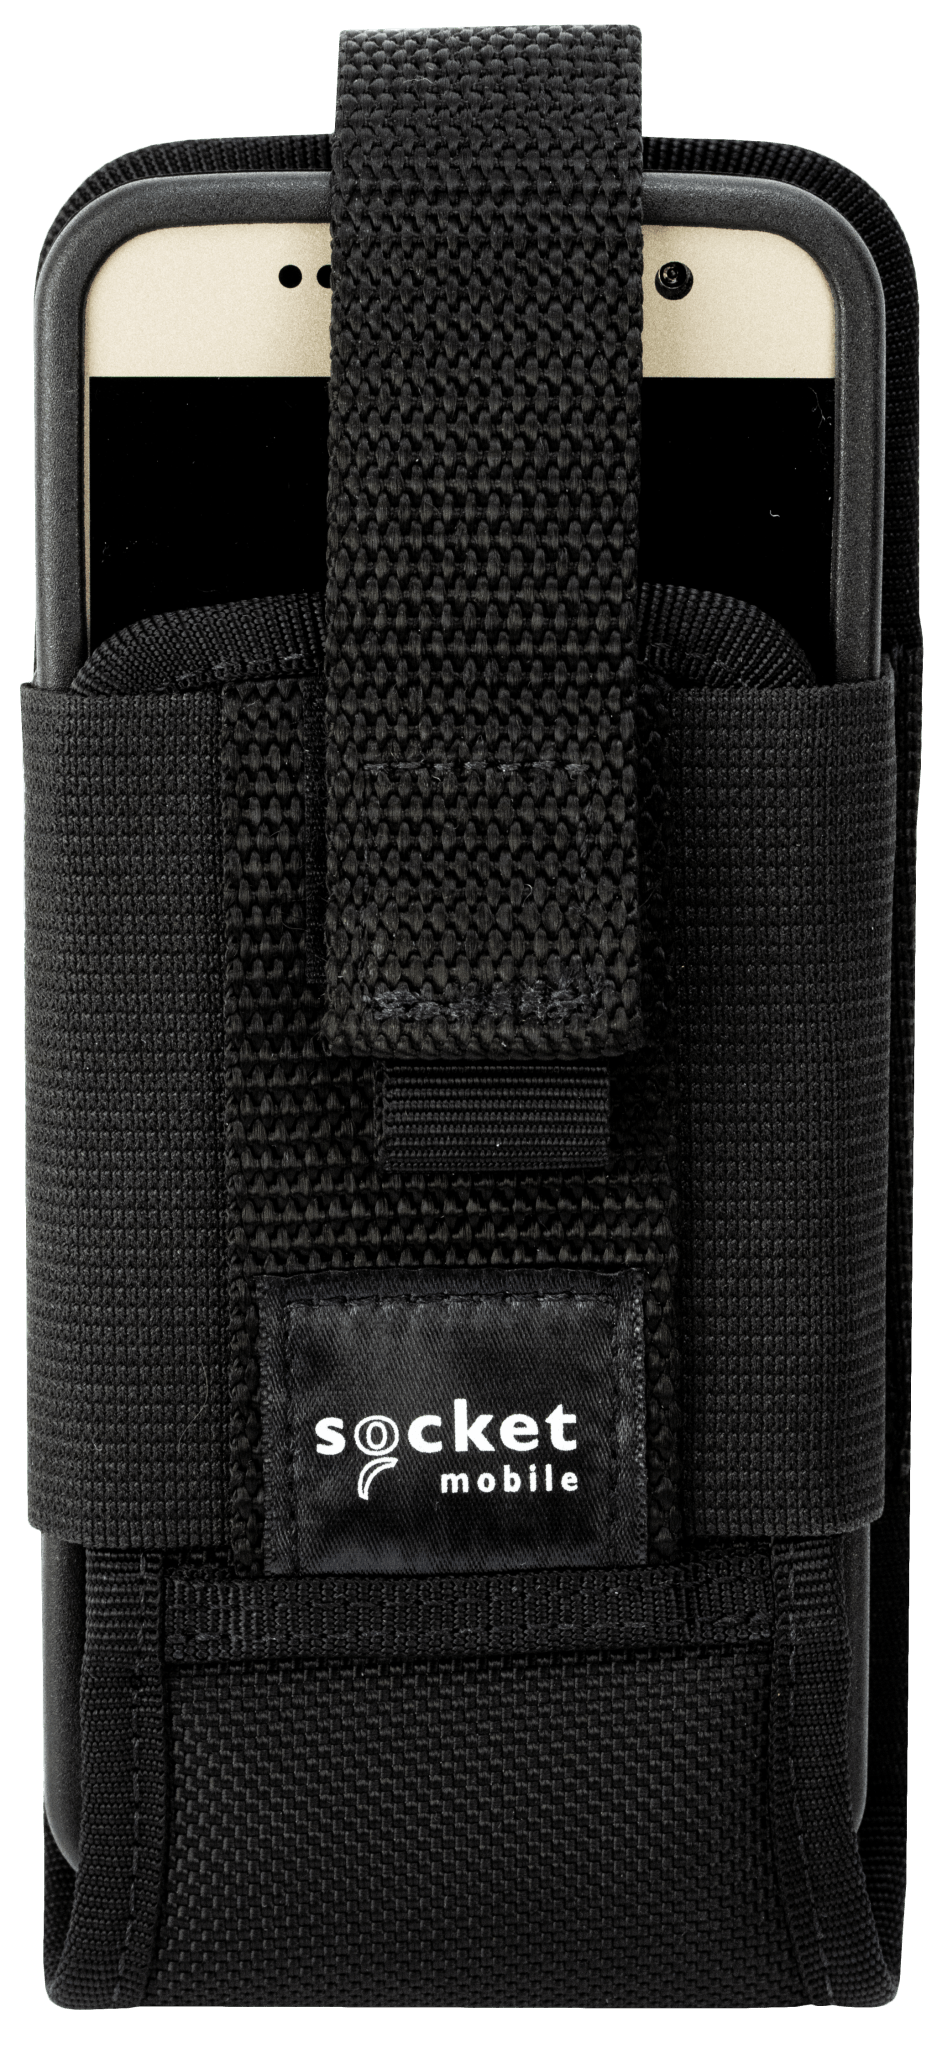 Cell Phone Belt Pouch and Holster | SafeSleeve